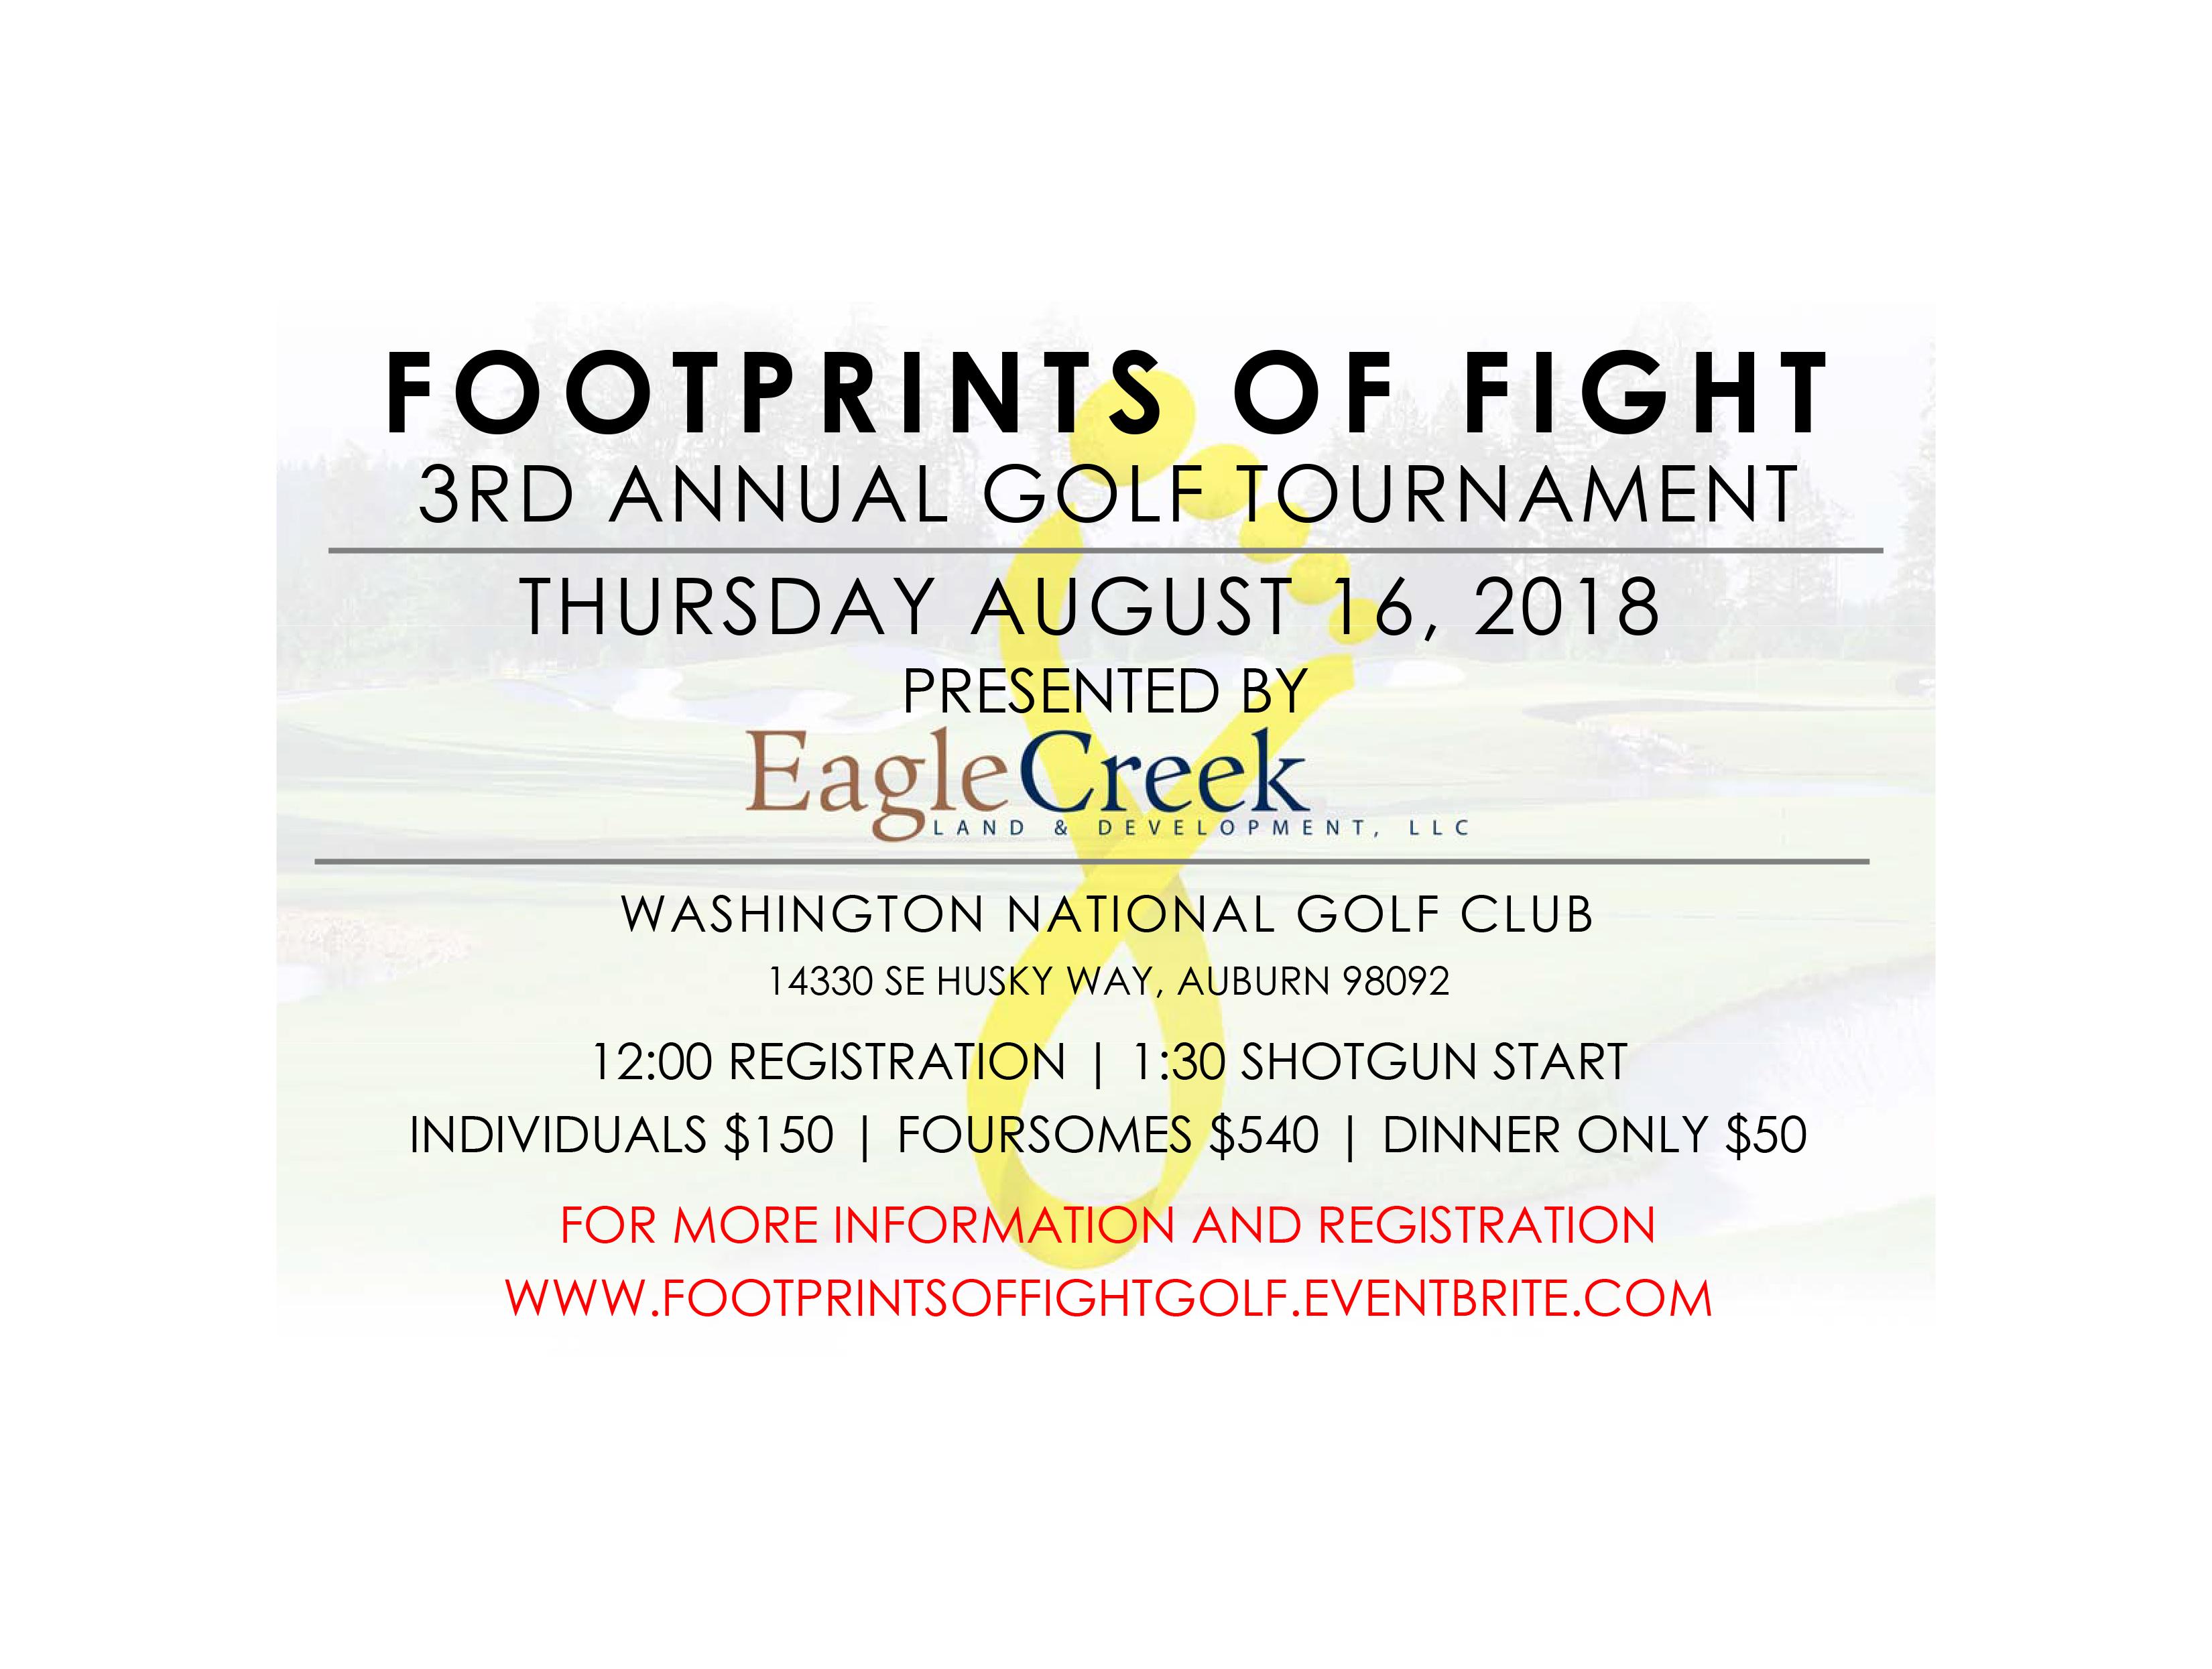 3rd Annual Footprints of Fight Golf Tournament